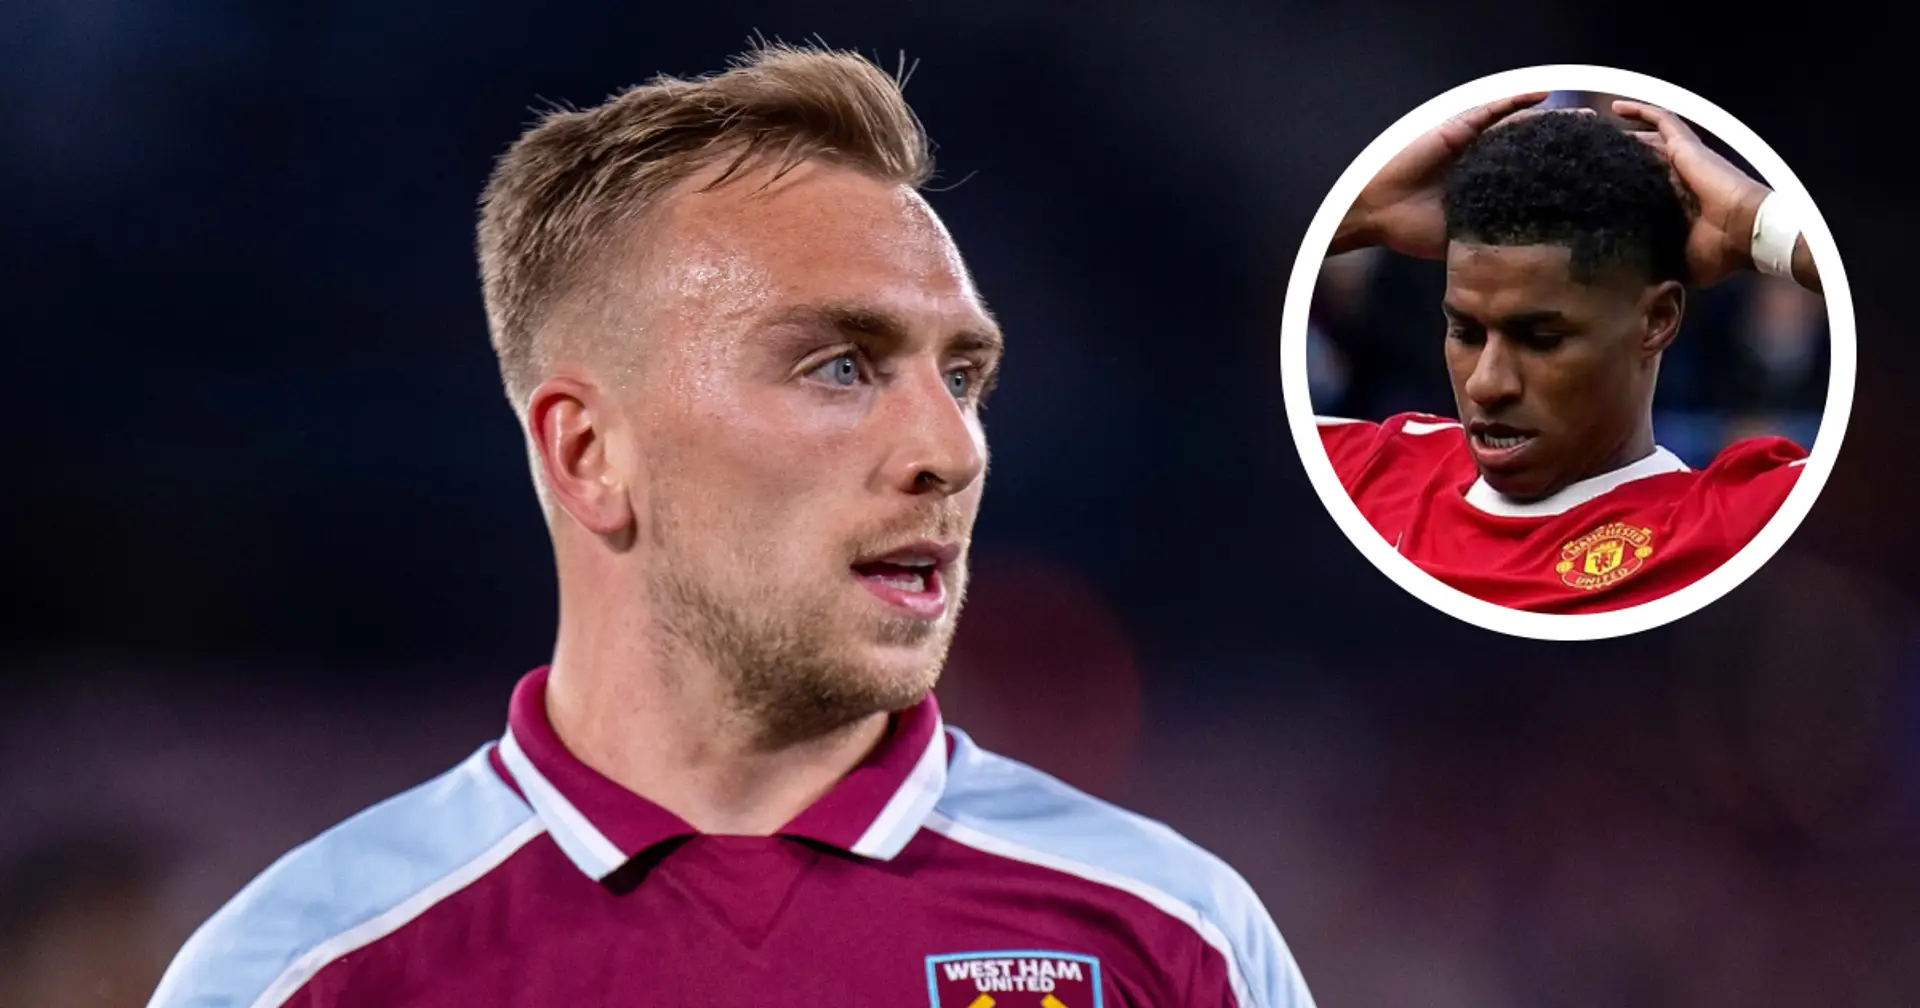 'He can play anywhere': Man United told to sign West Ham's Jarrod Bowen